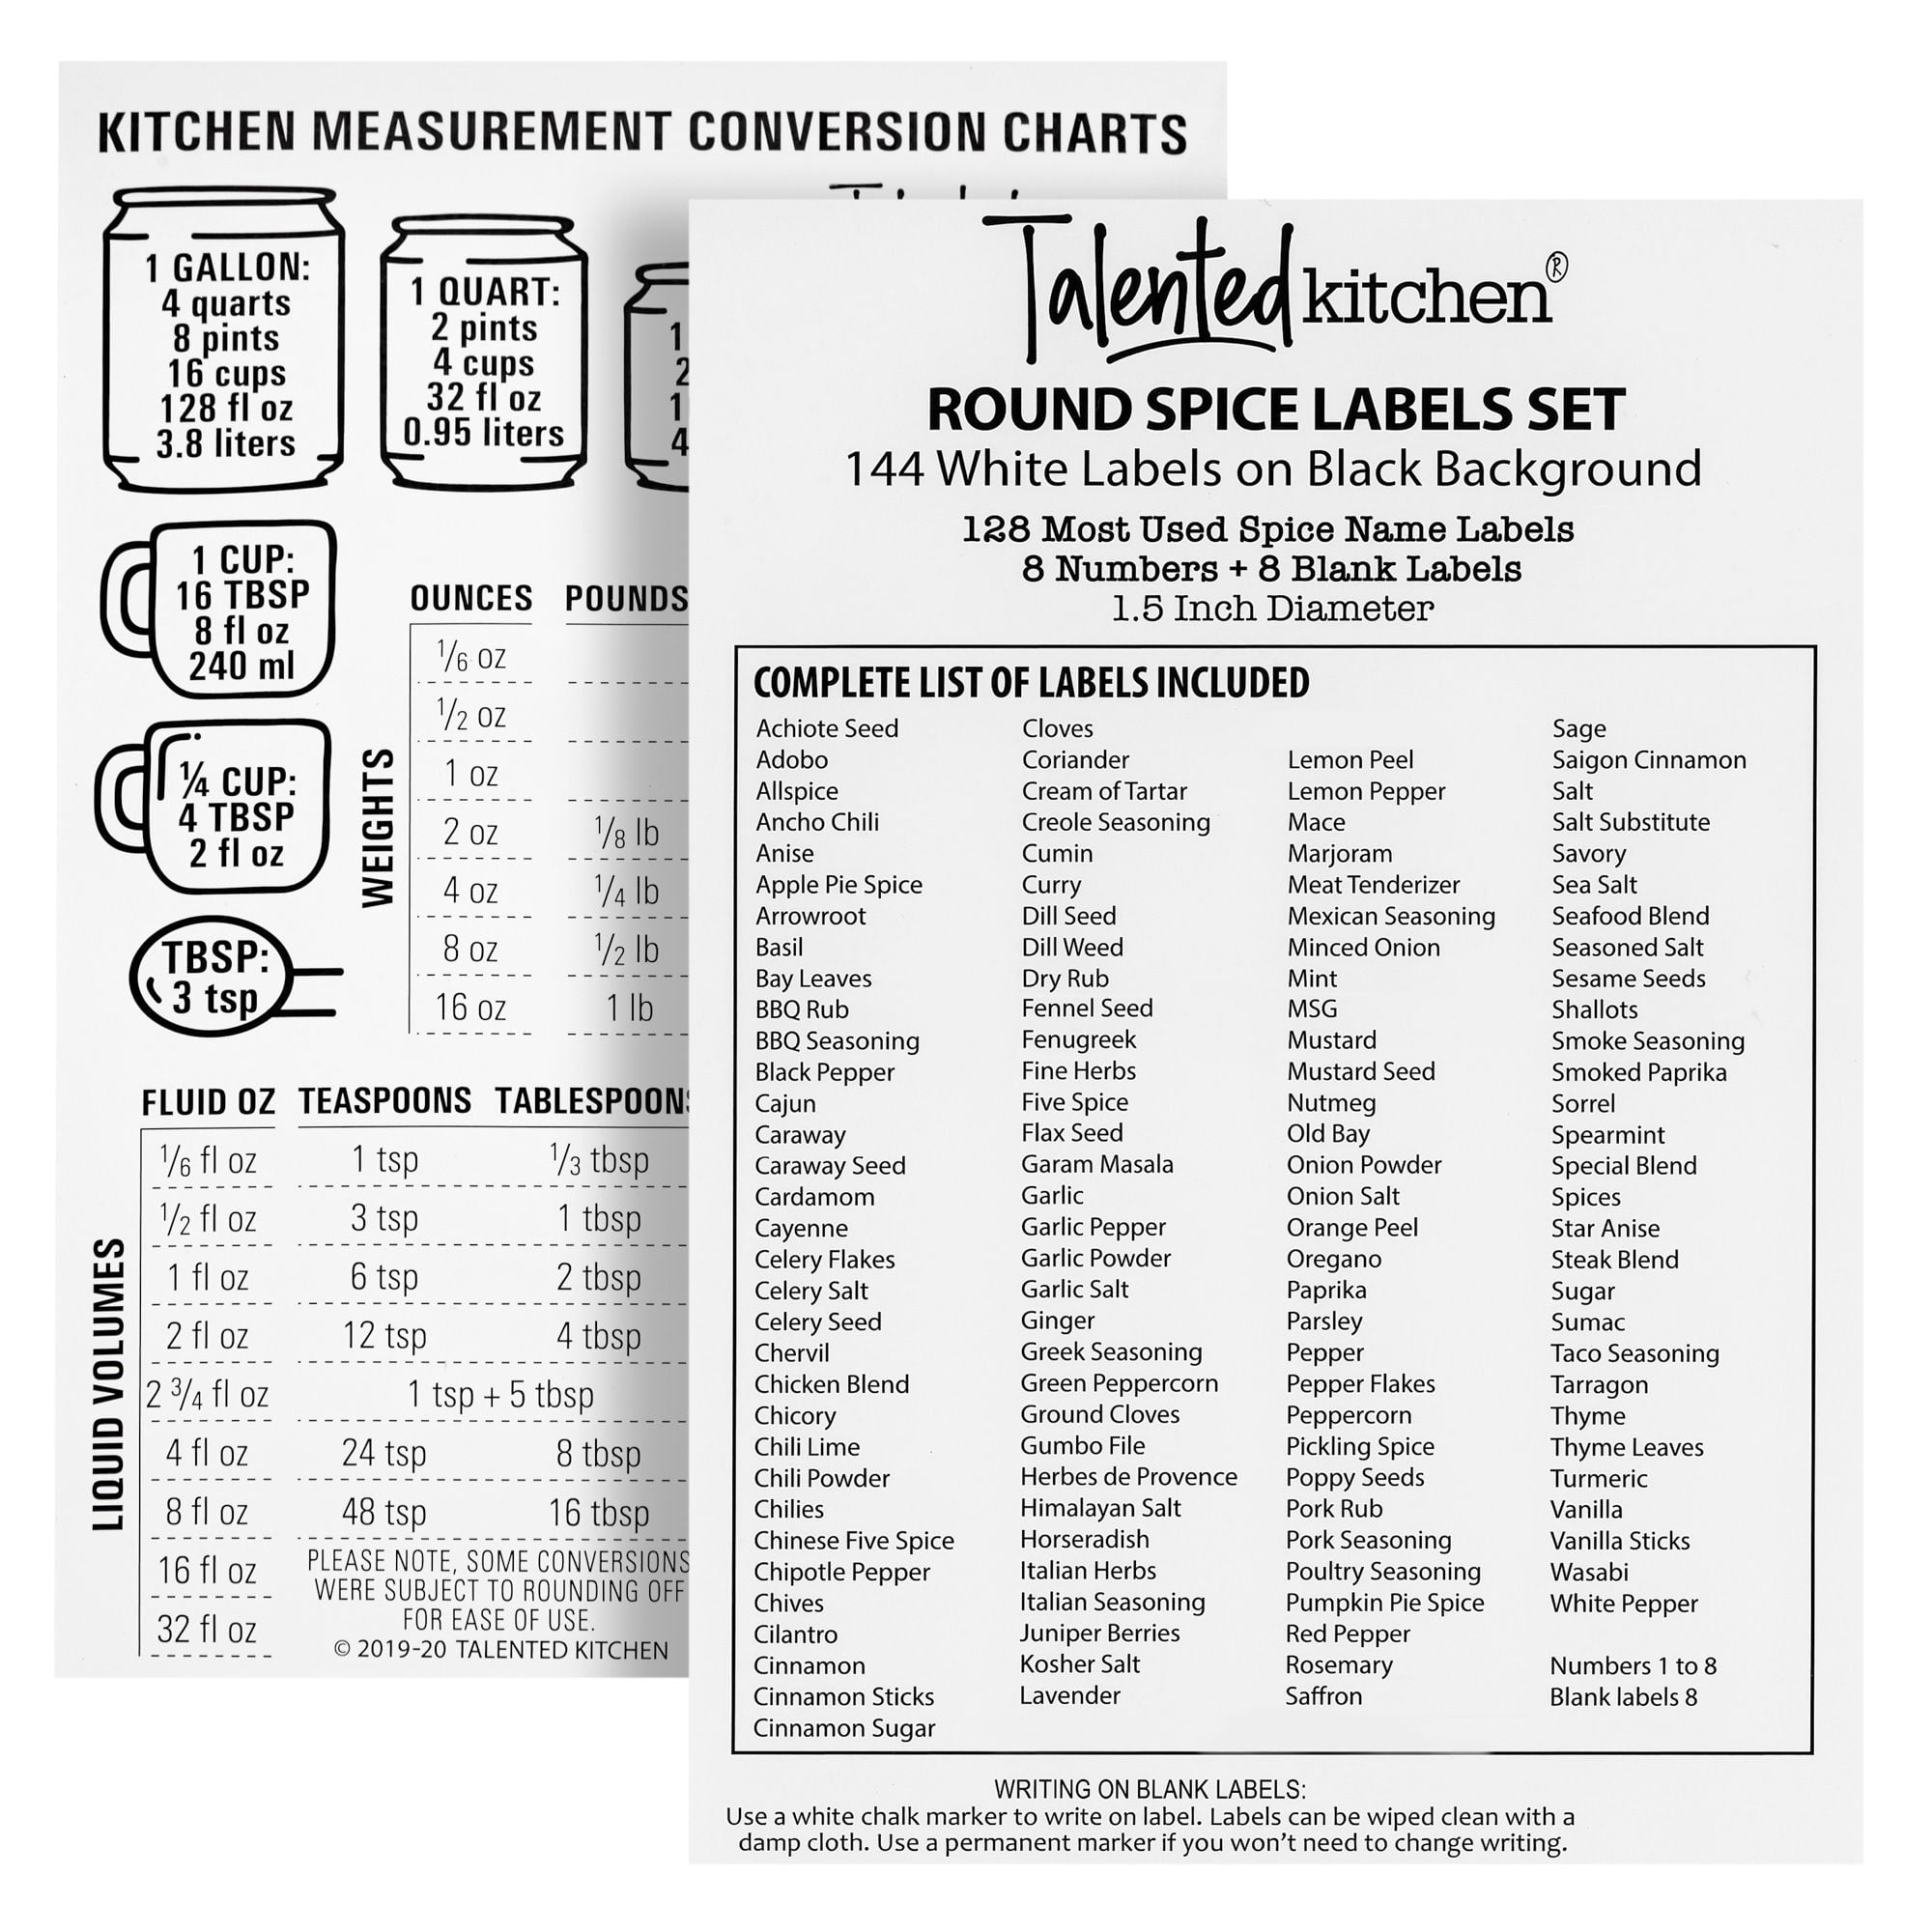 6oz, BEST VALUE 14 Large Glass Spice Jars includes pre-printed 126